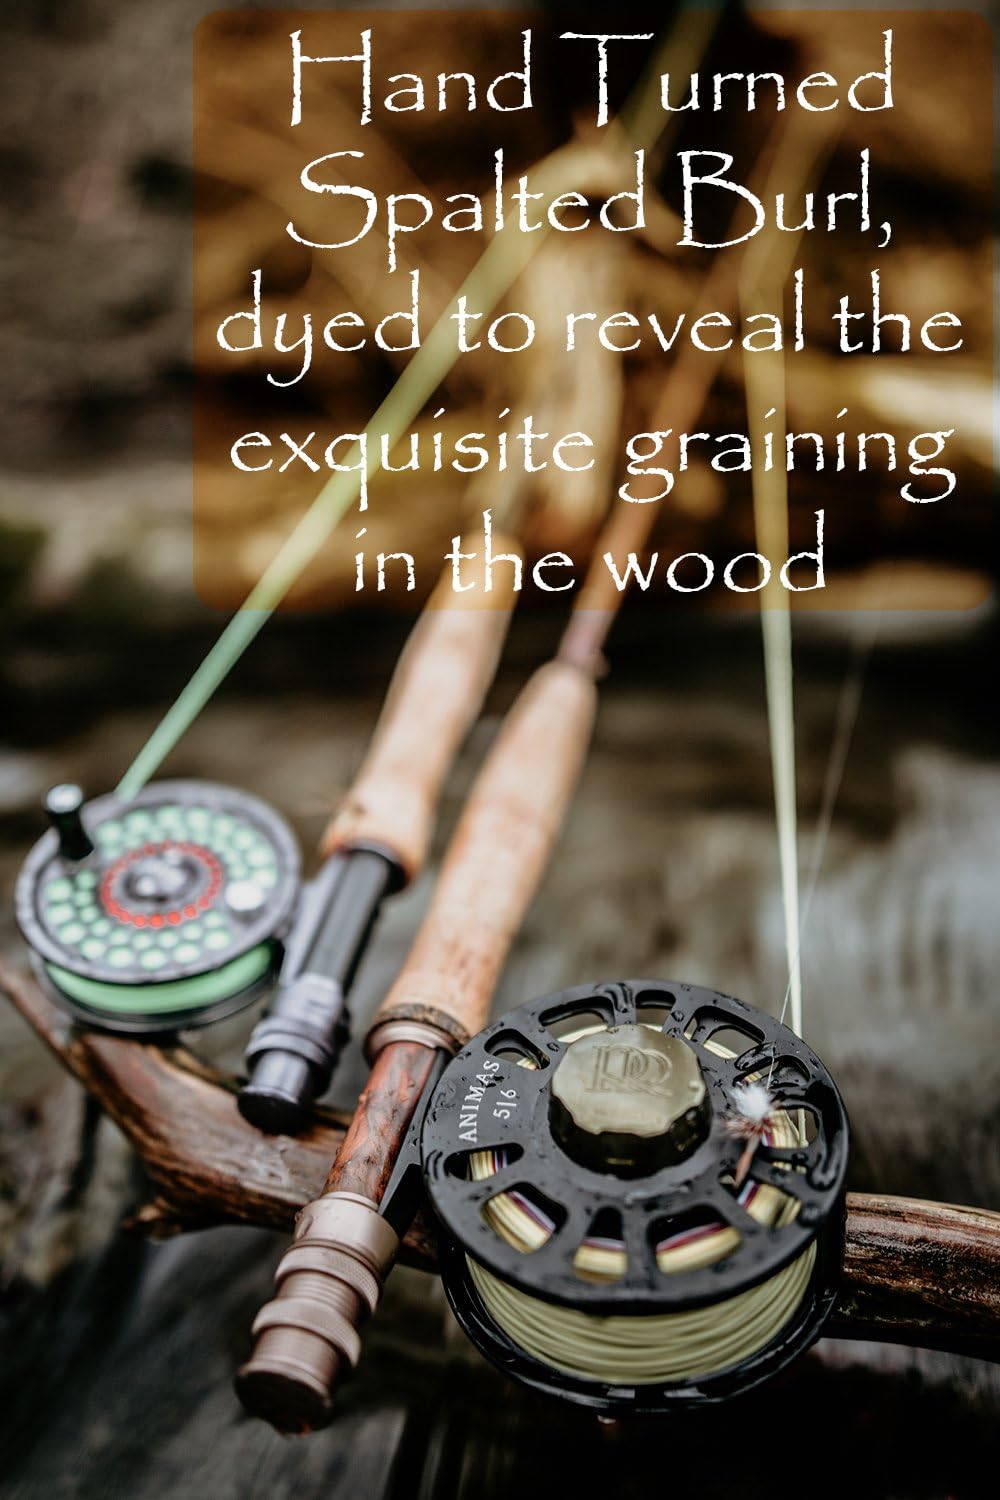 Moonshine Rod Co. The Revival Series Fly Fishing Rod Review - TU420